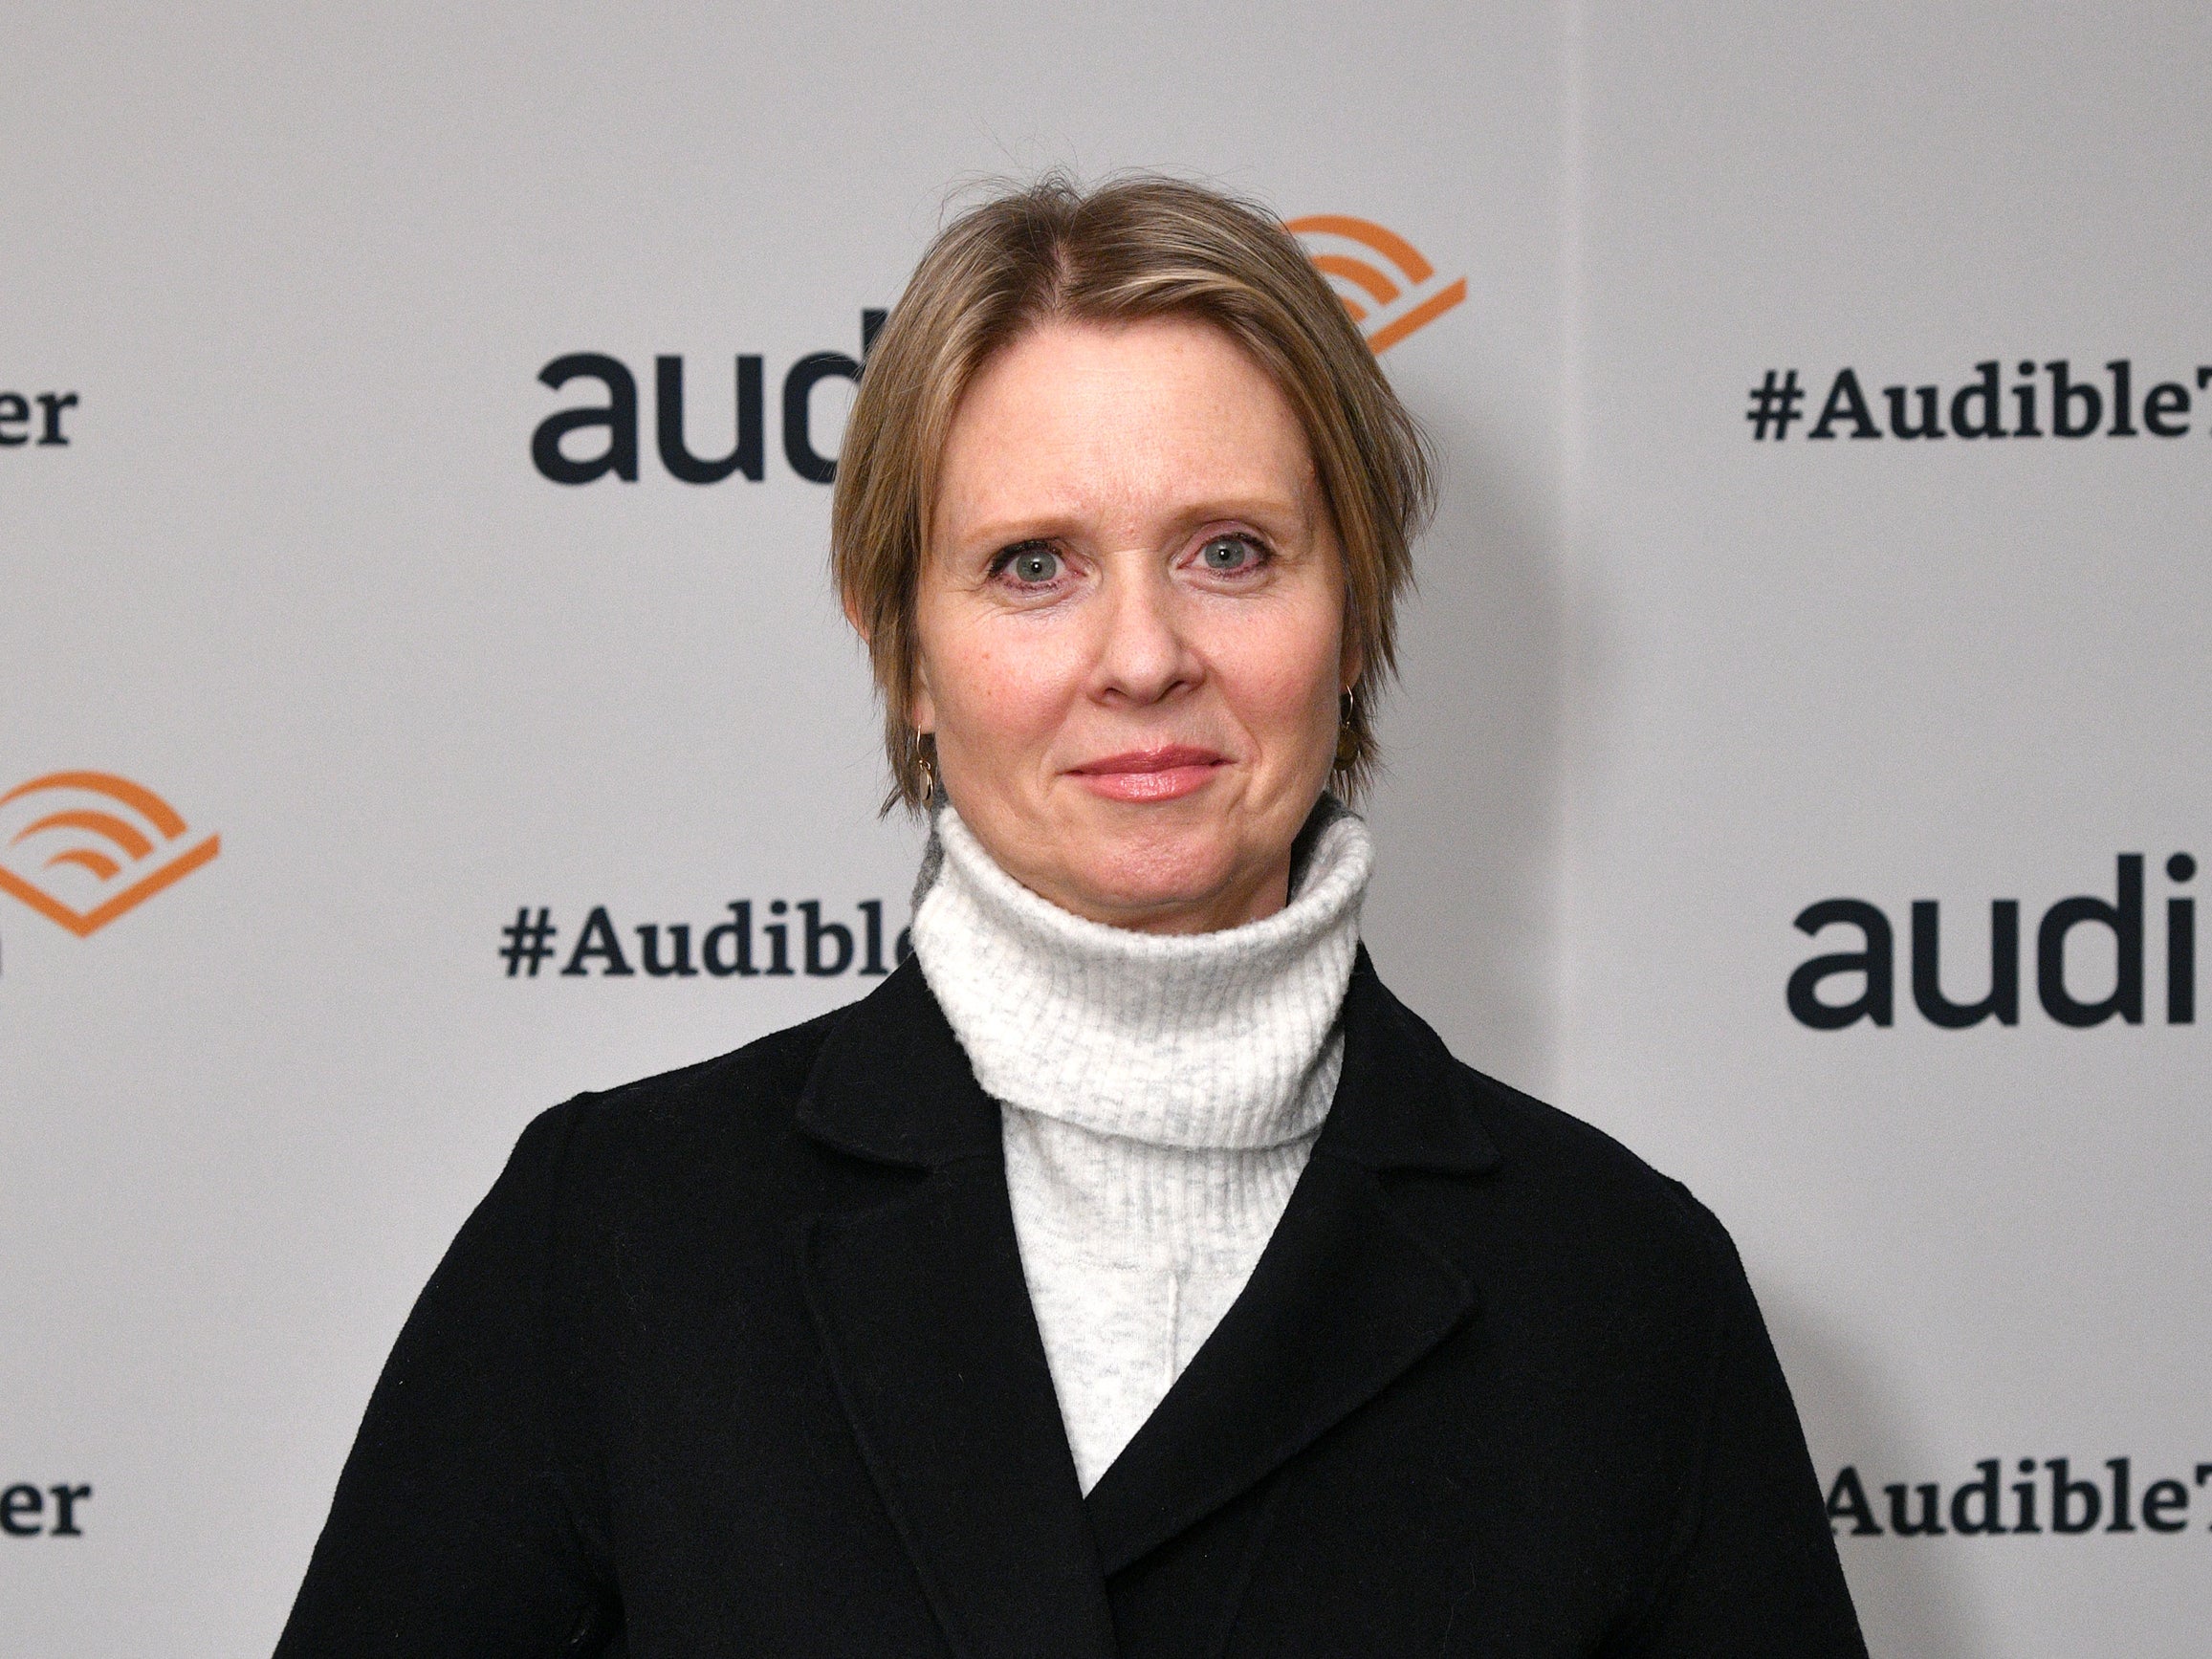 Cynthia Nixon at an event on 10 January 2020 in New York City